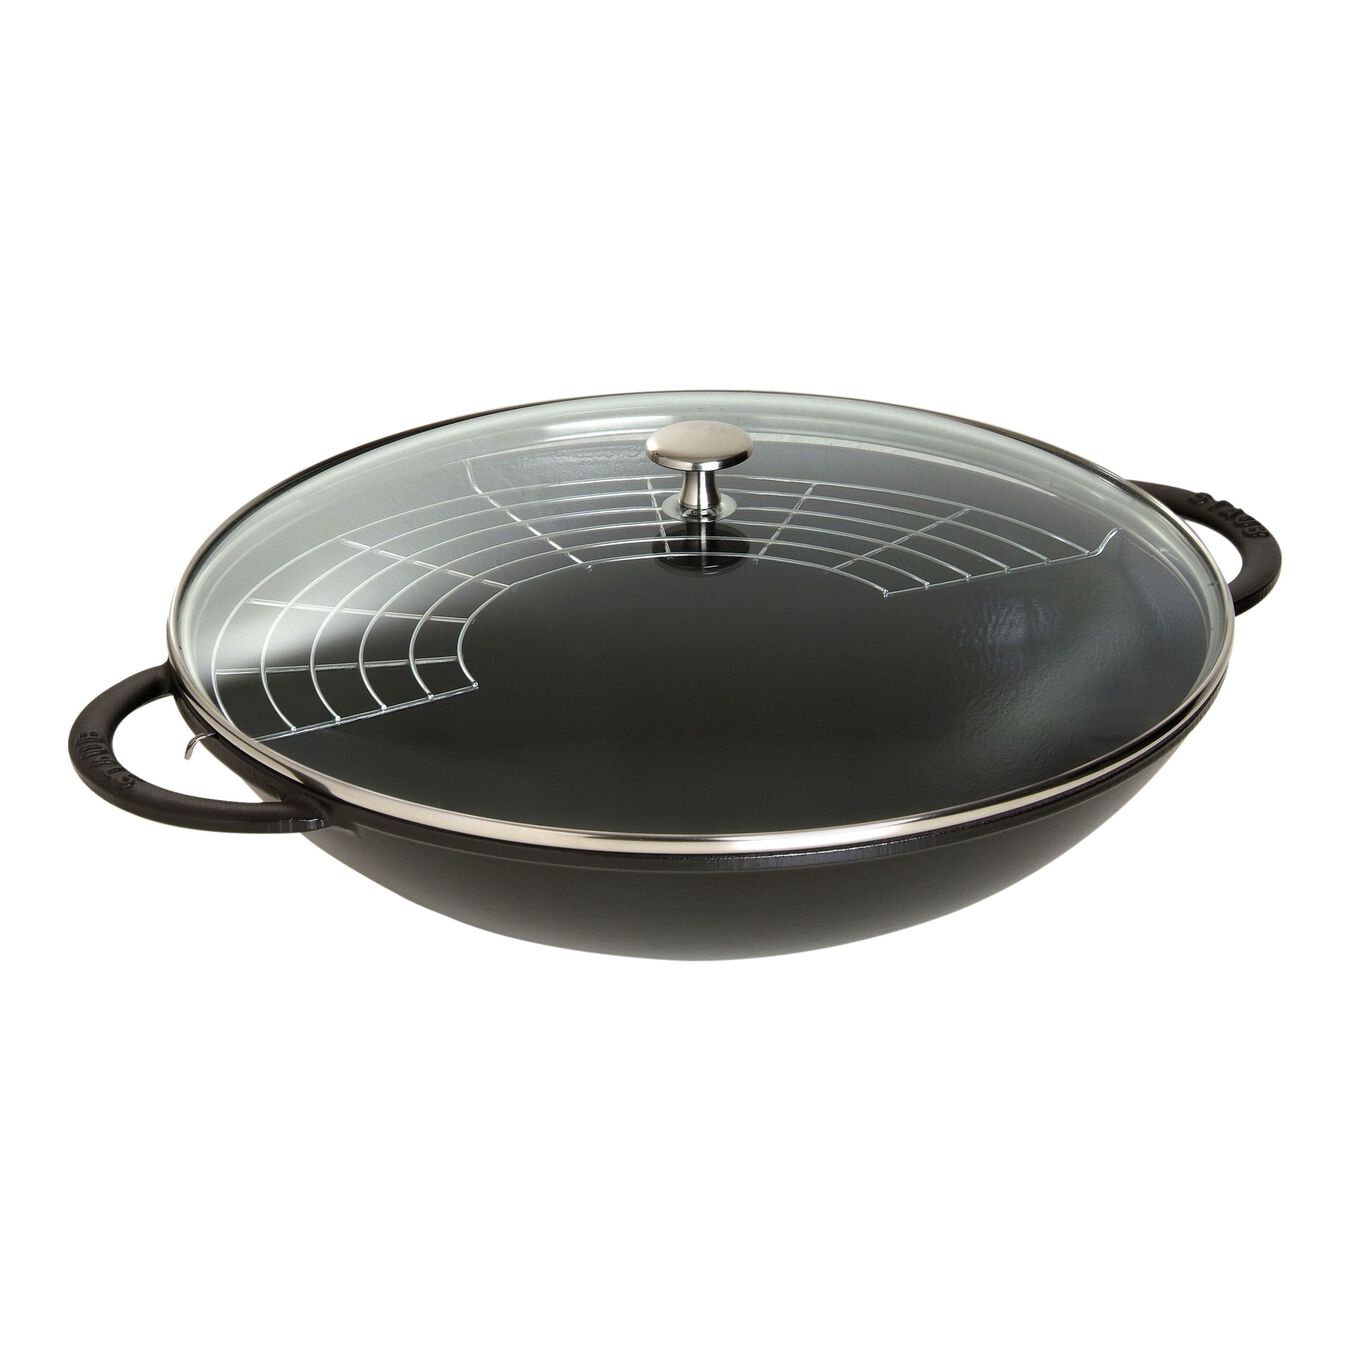 37 cm / 14.5 inch cast iron Wok with glass lid, black,,large 1